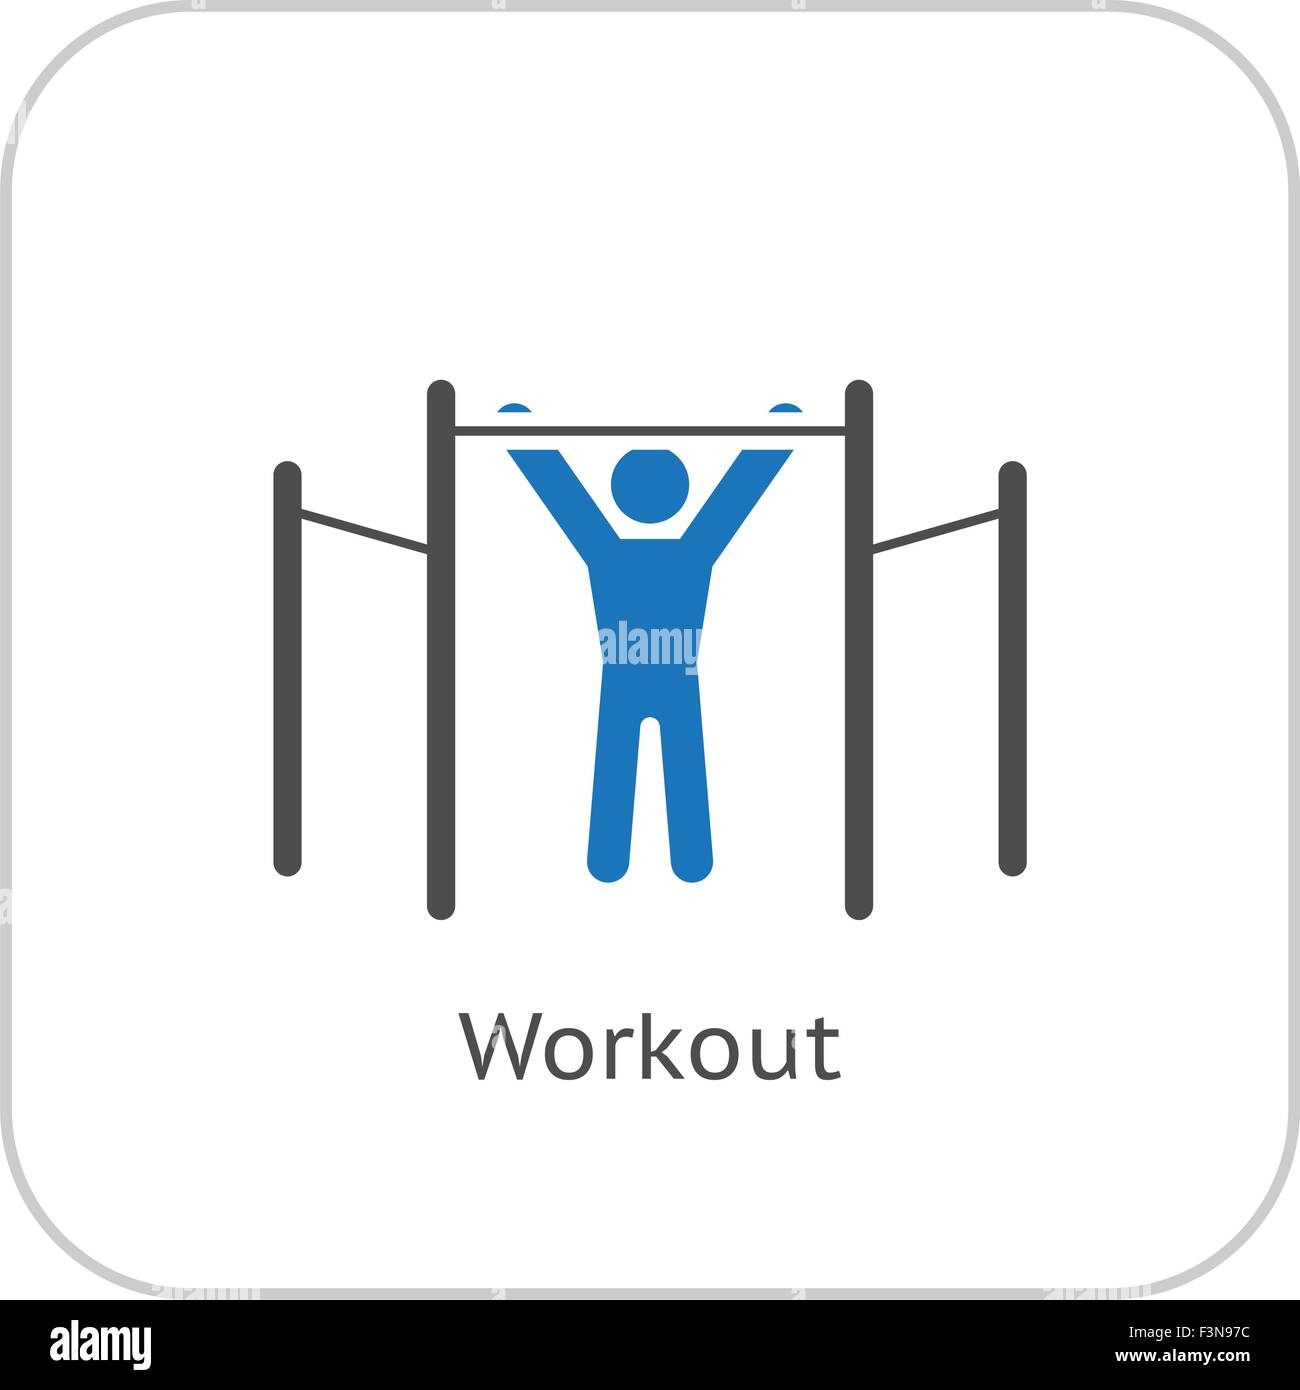 Workout Icon. Flat Design. Stock Vector